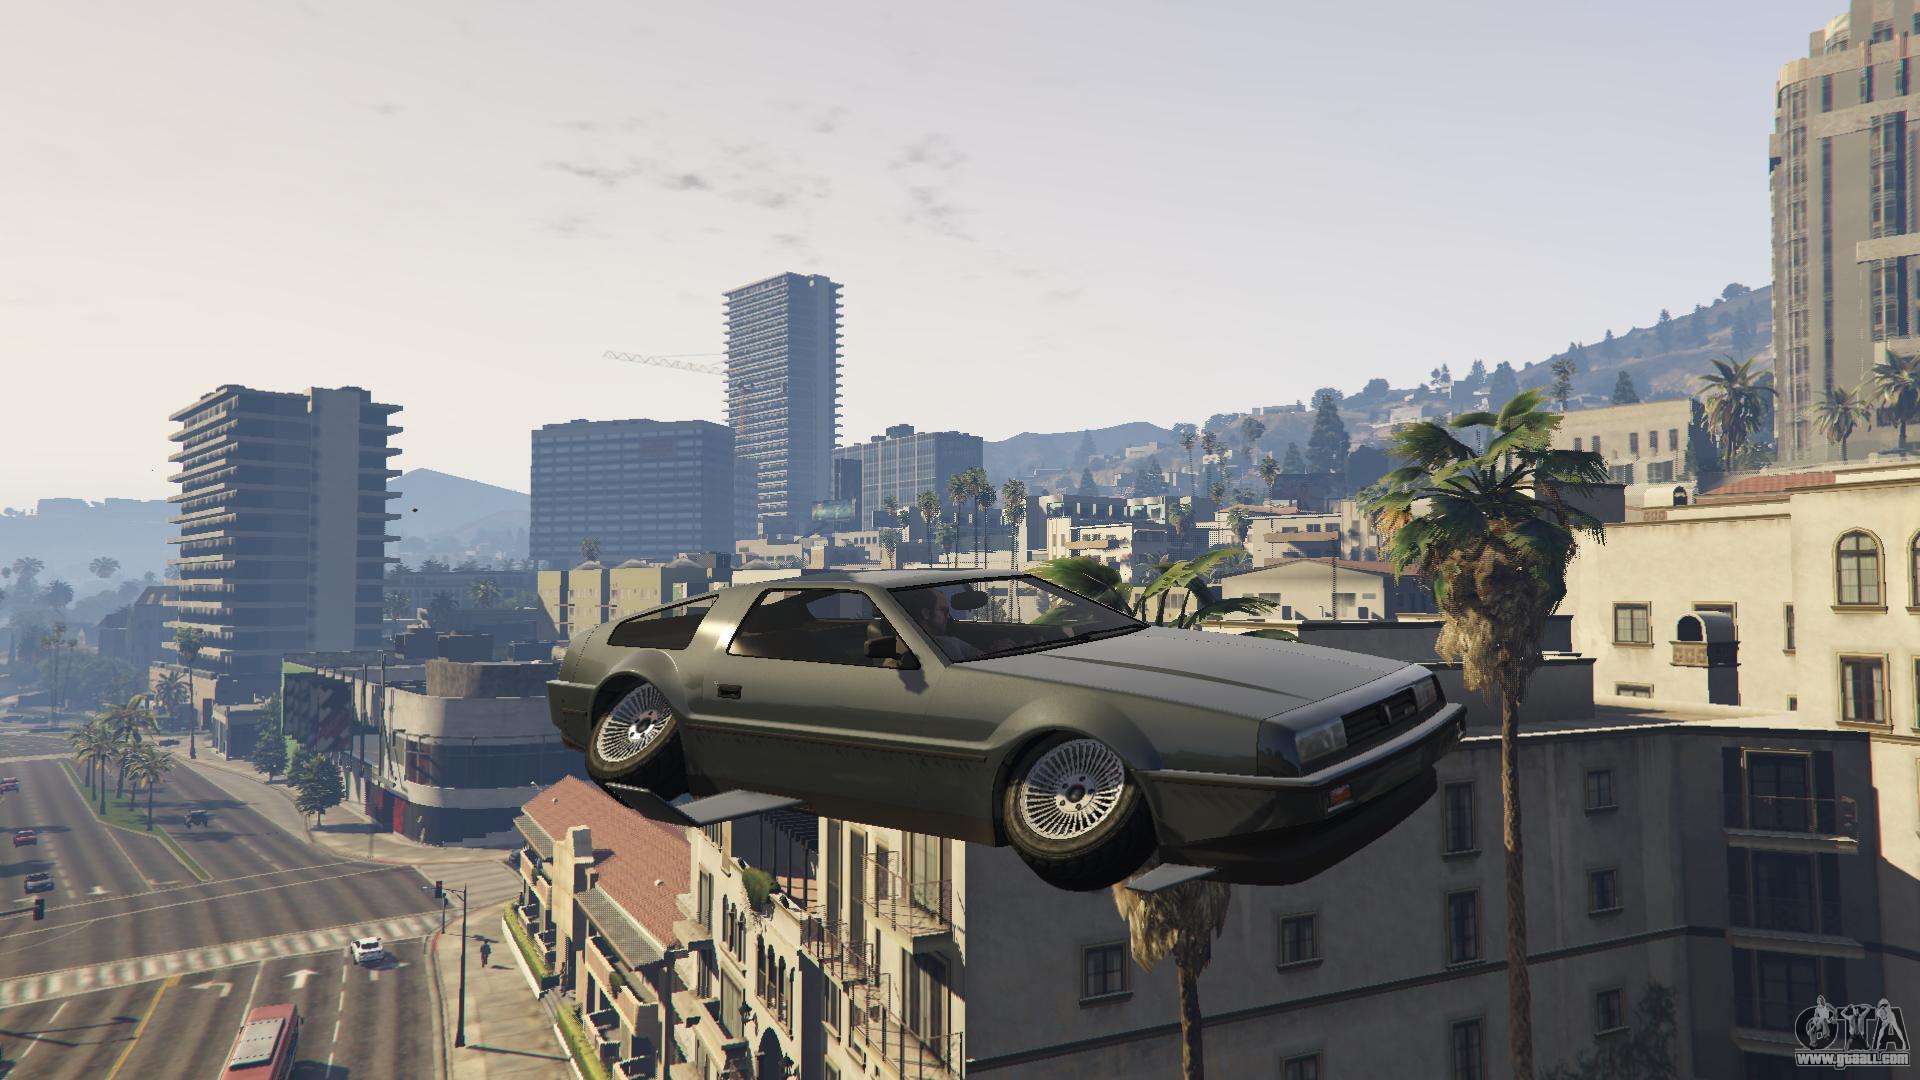 How to fly by a car in GTA 5 online.